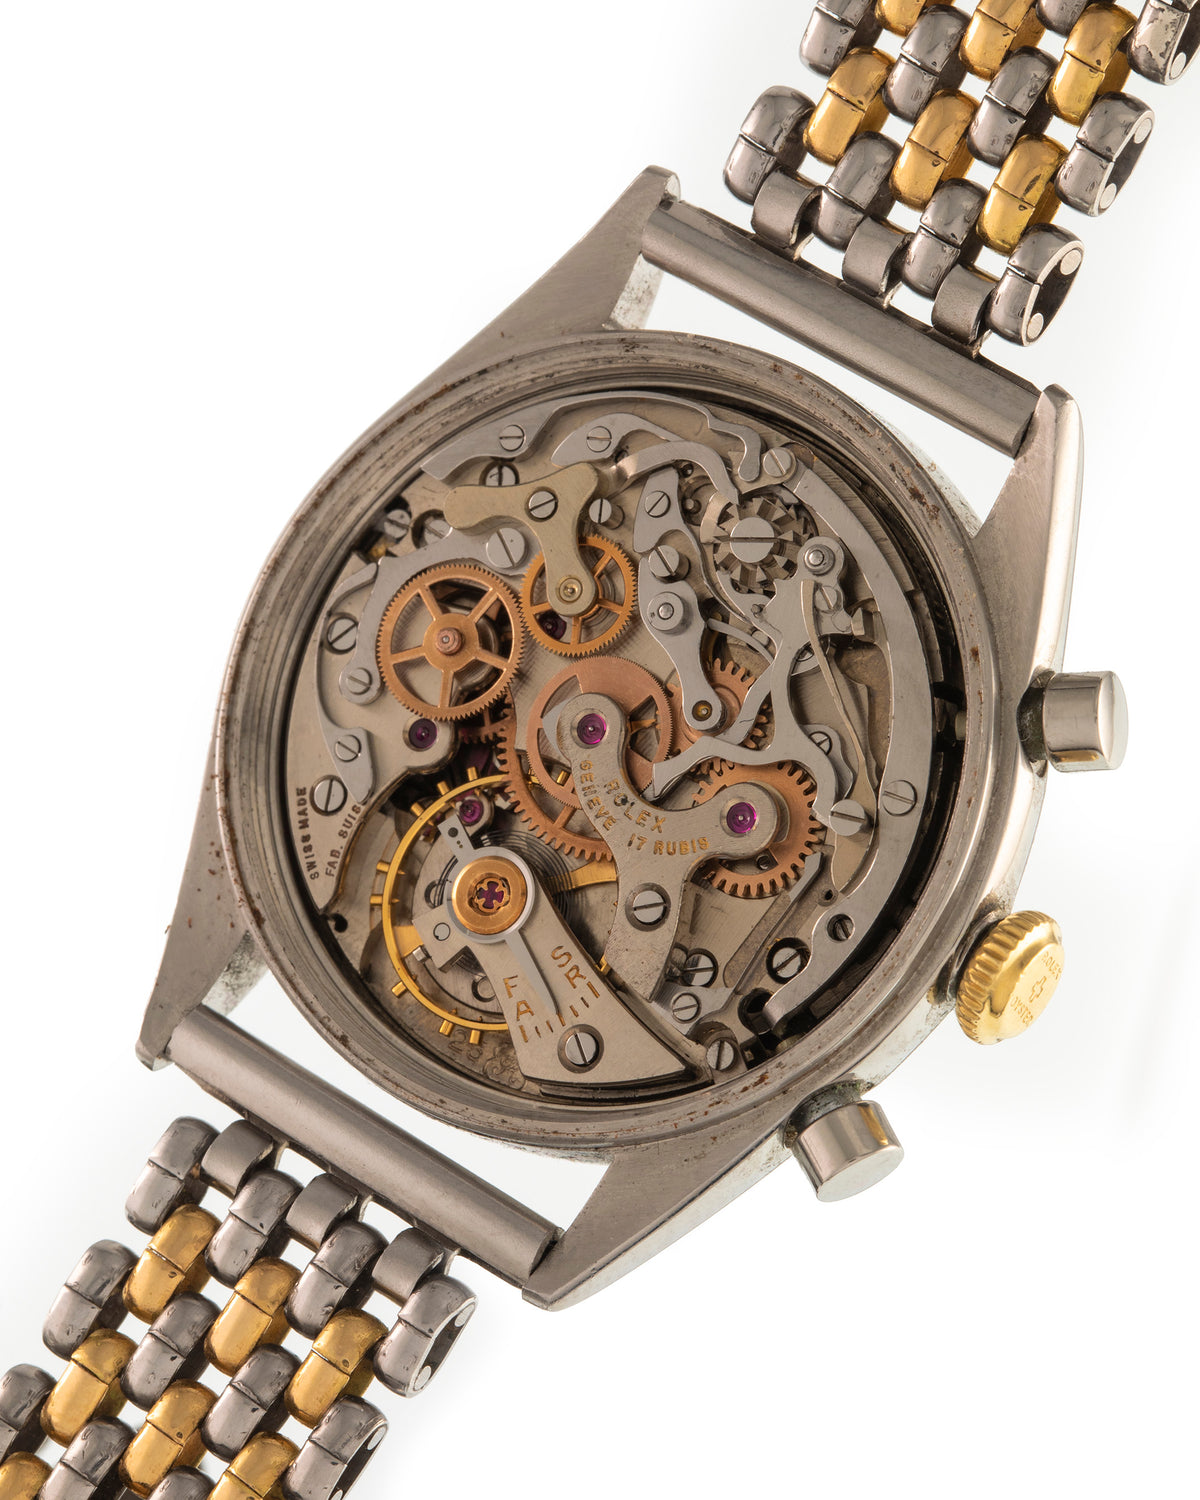 Rolex Chronograph &quot;Monoblocco&quot; Ref. 4500 in steel and gold